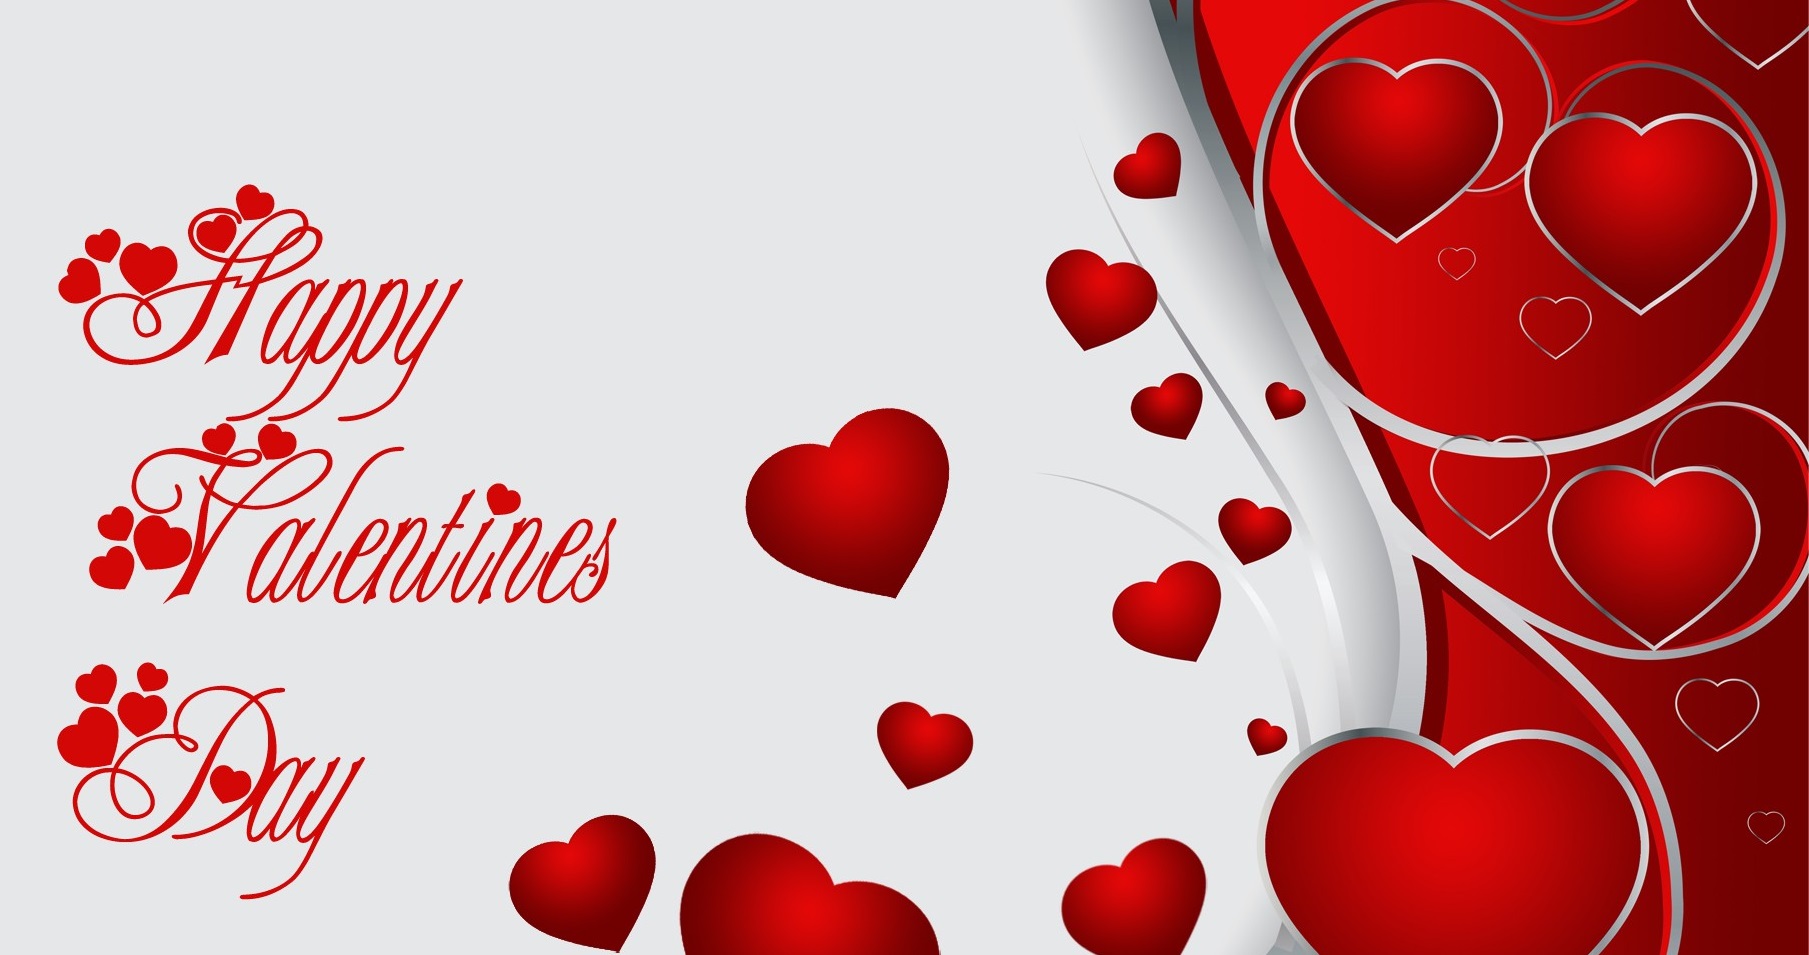 Happy Valentines day with red heart symbols free download